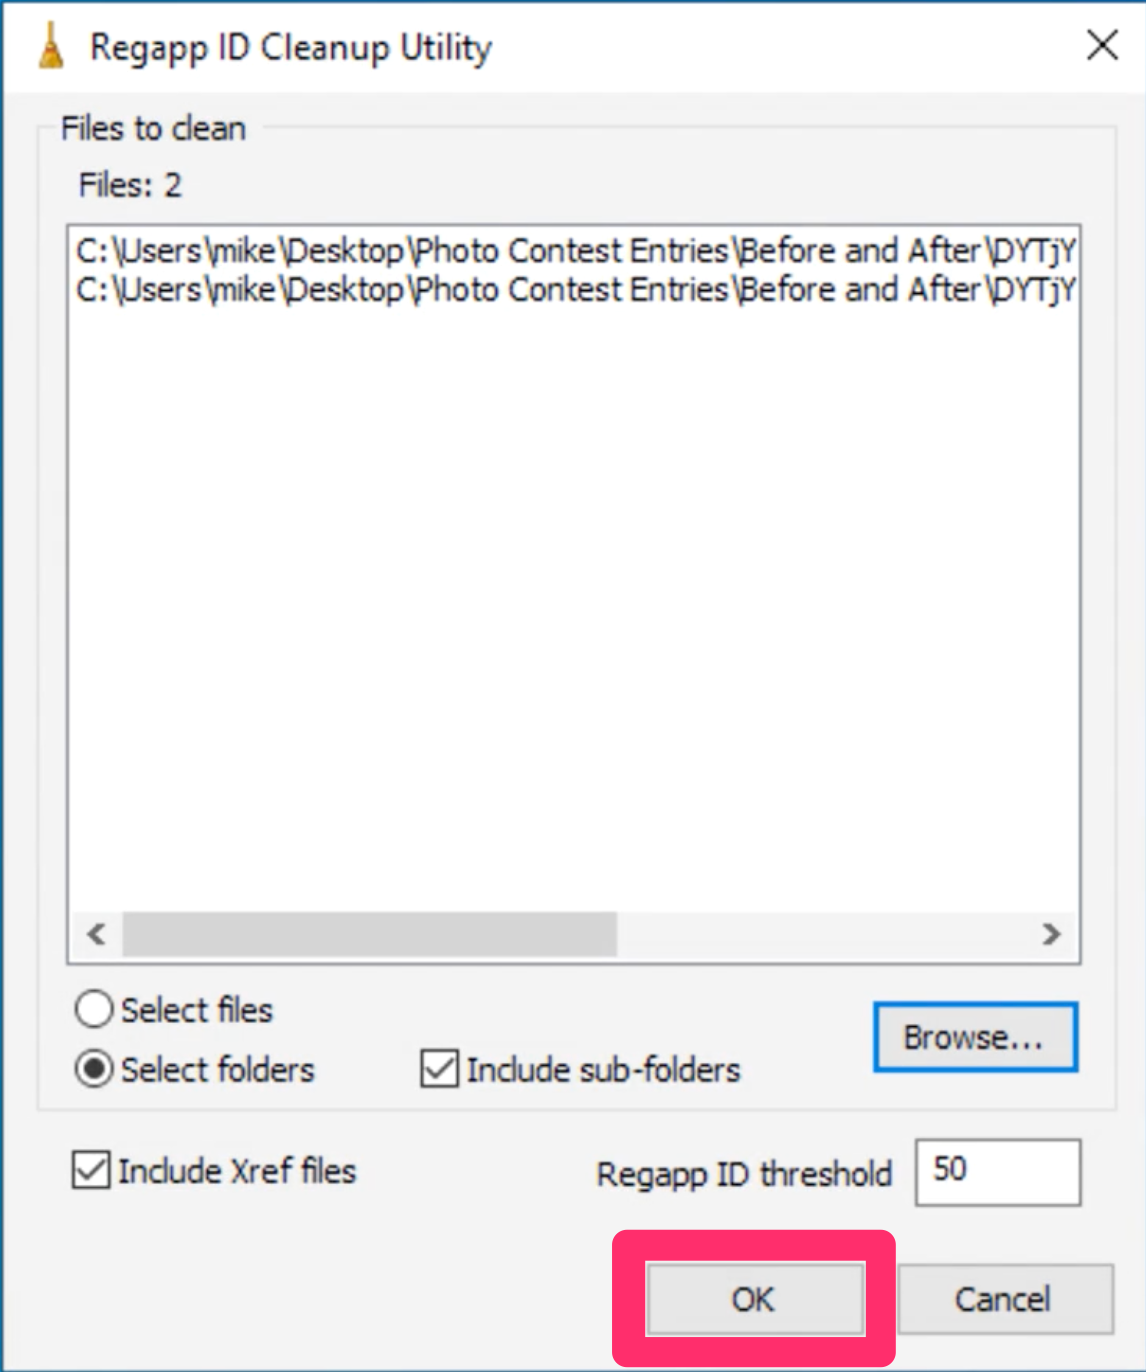 The files are listed in the cleanup utility dialog box